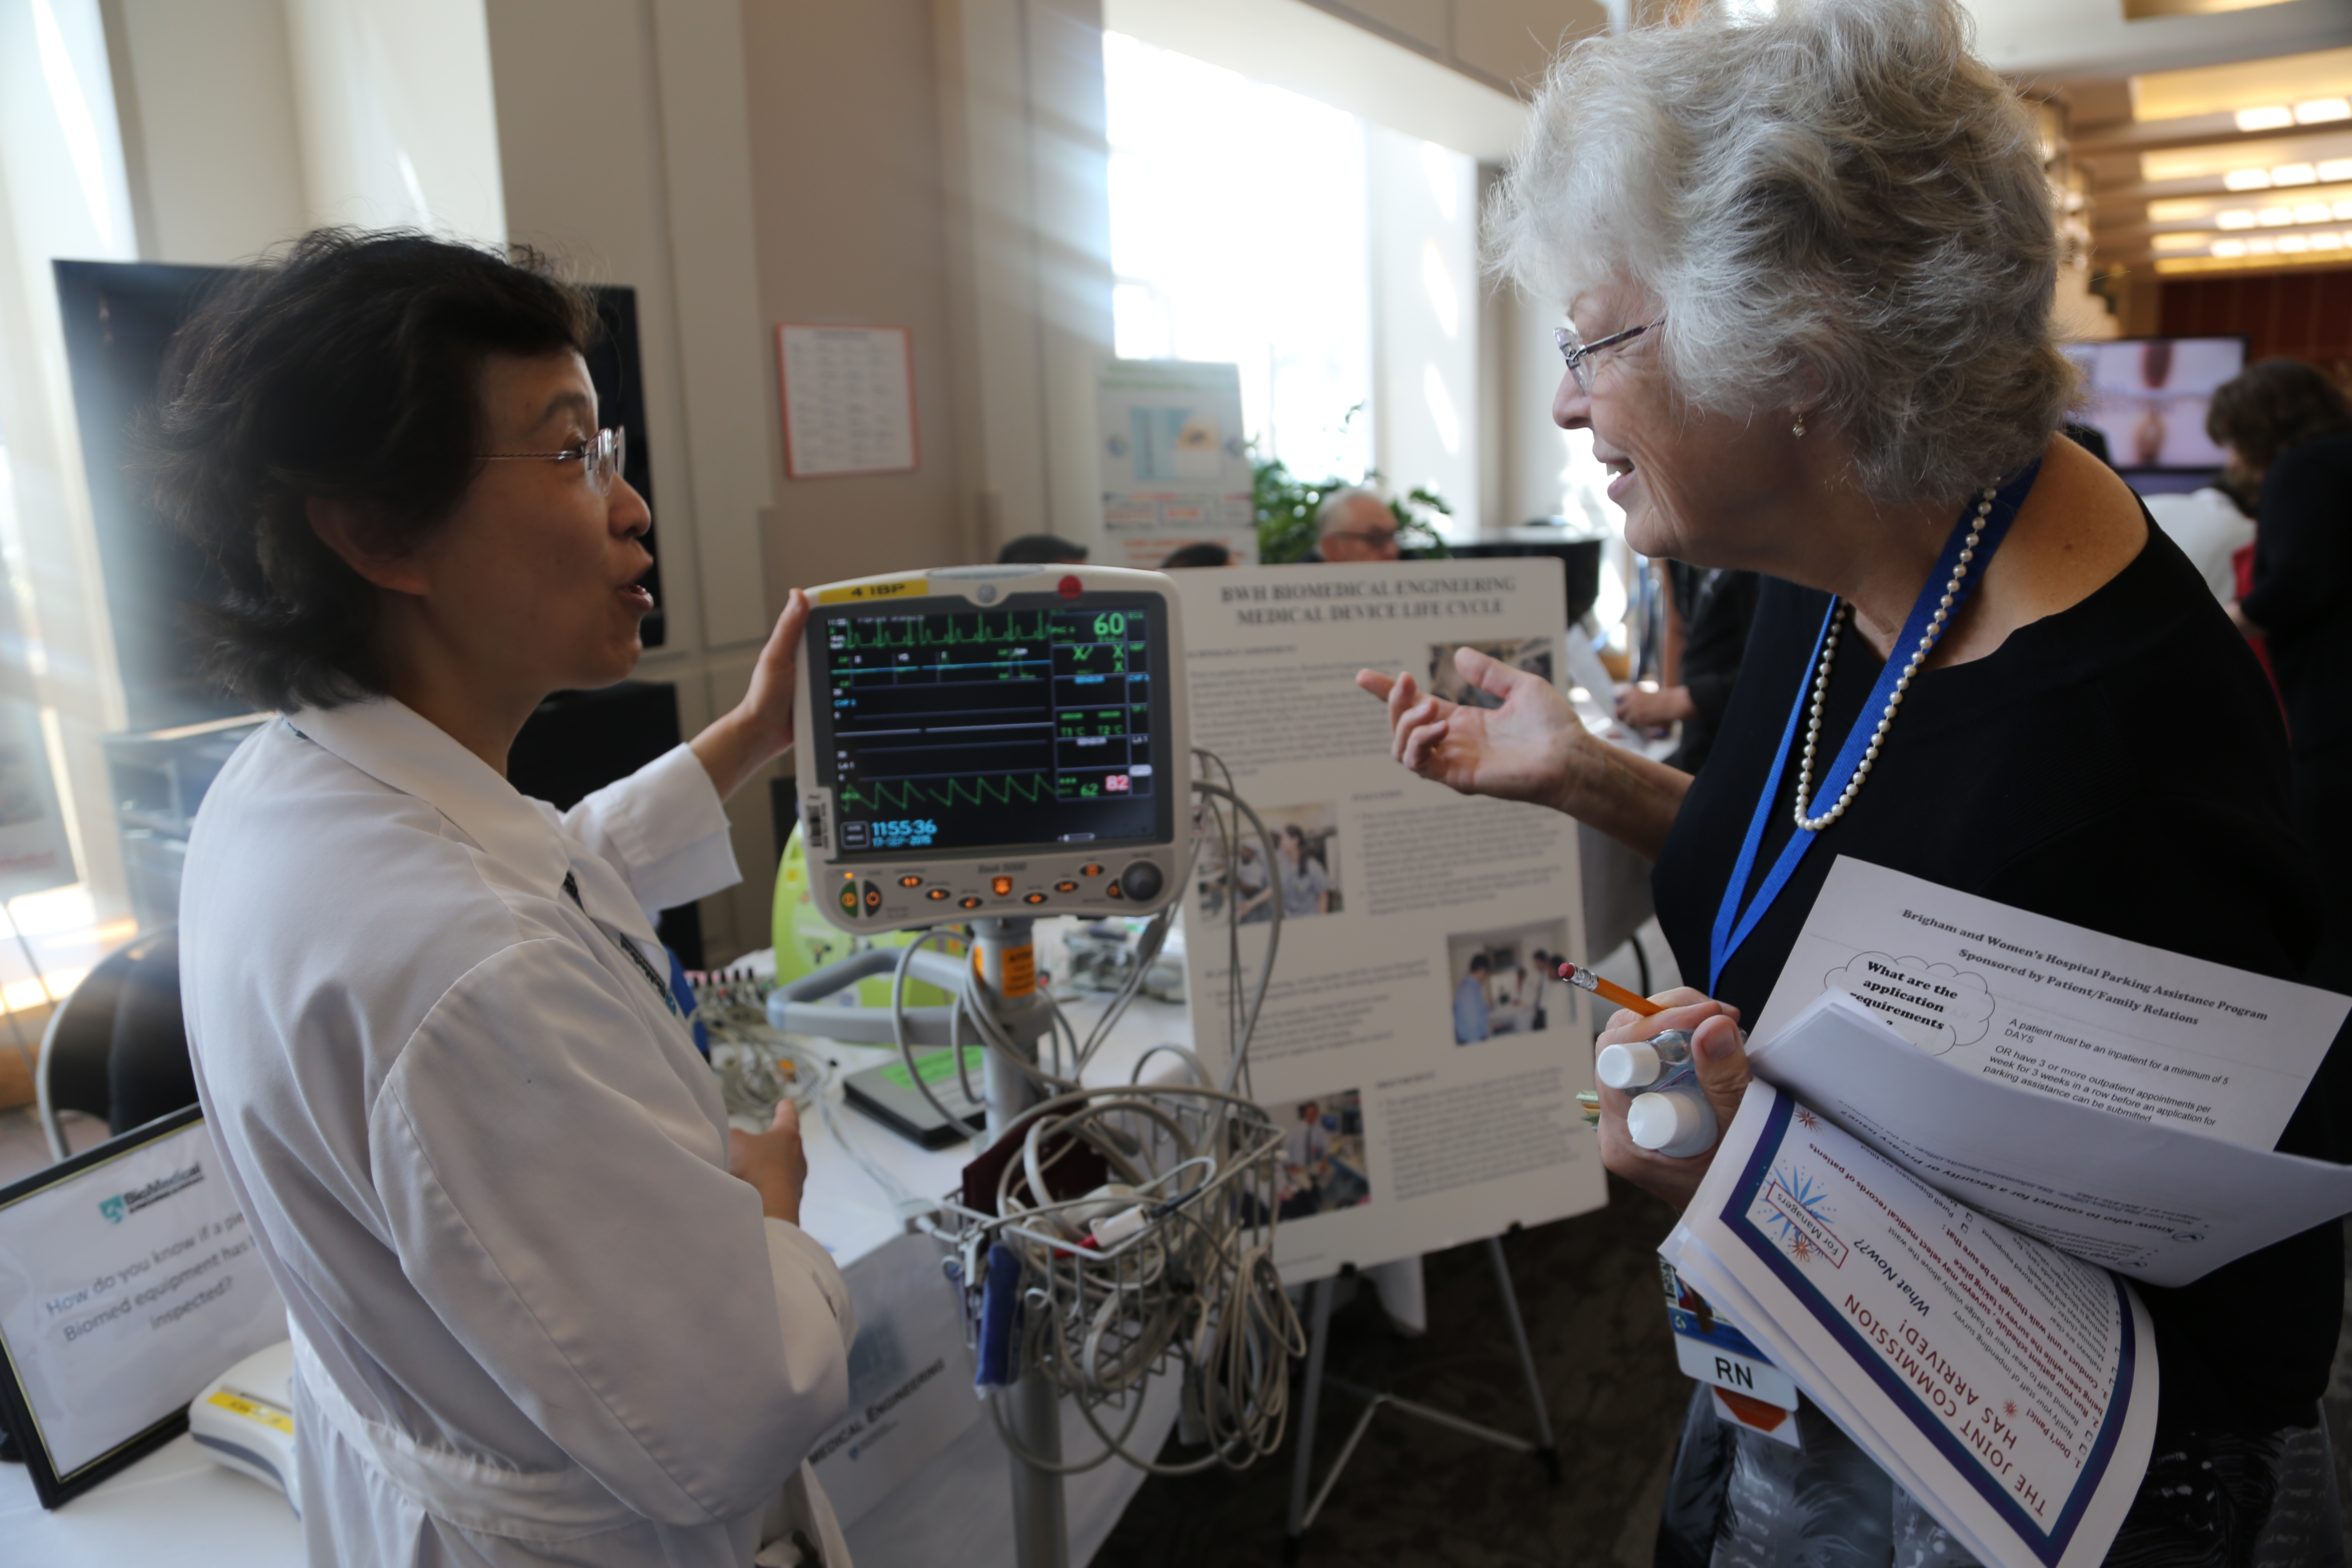 From left: Xiaojie Liu, of Biomedical Engineering, and Brenda Griffin, of Nursing, at BWH’s Joint Commission Readiness Fair last September.